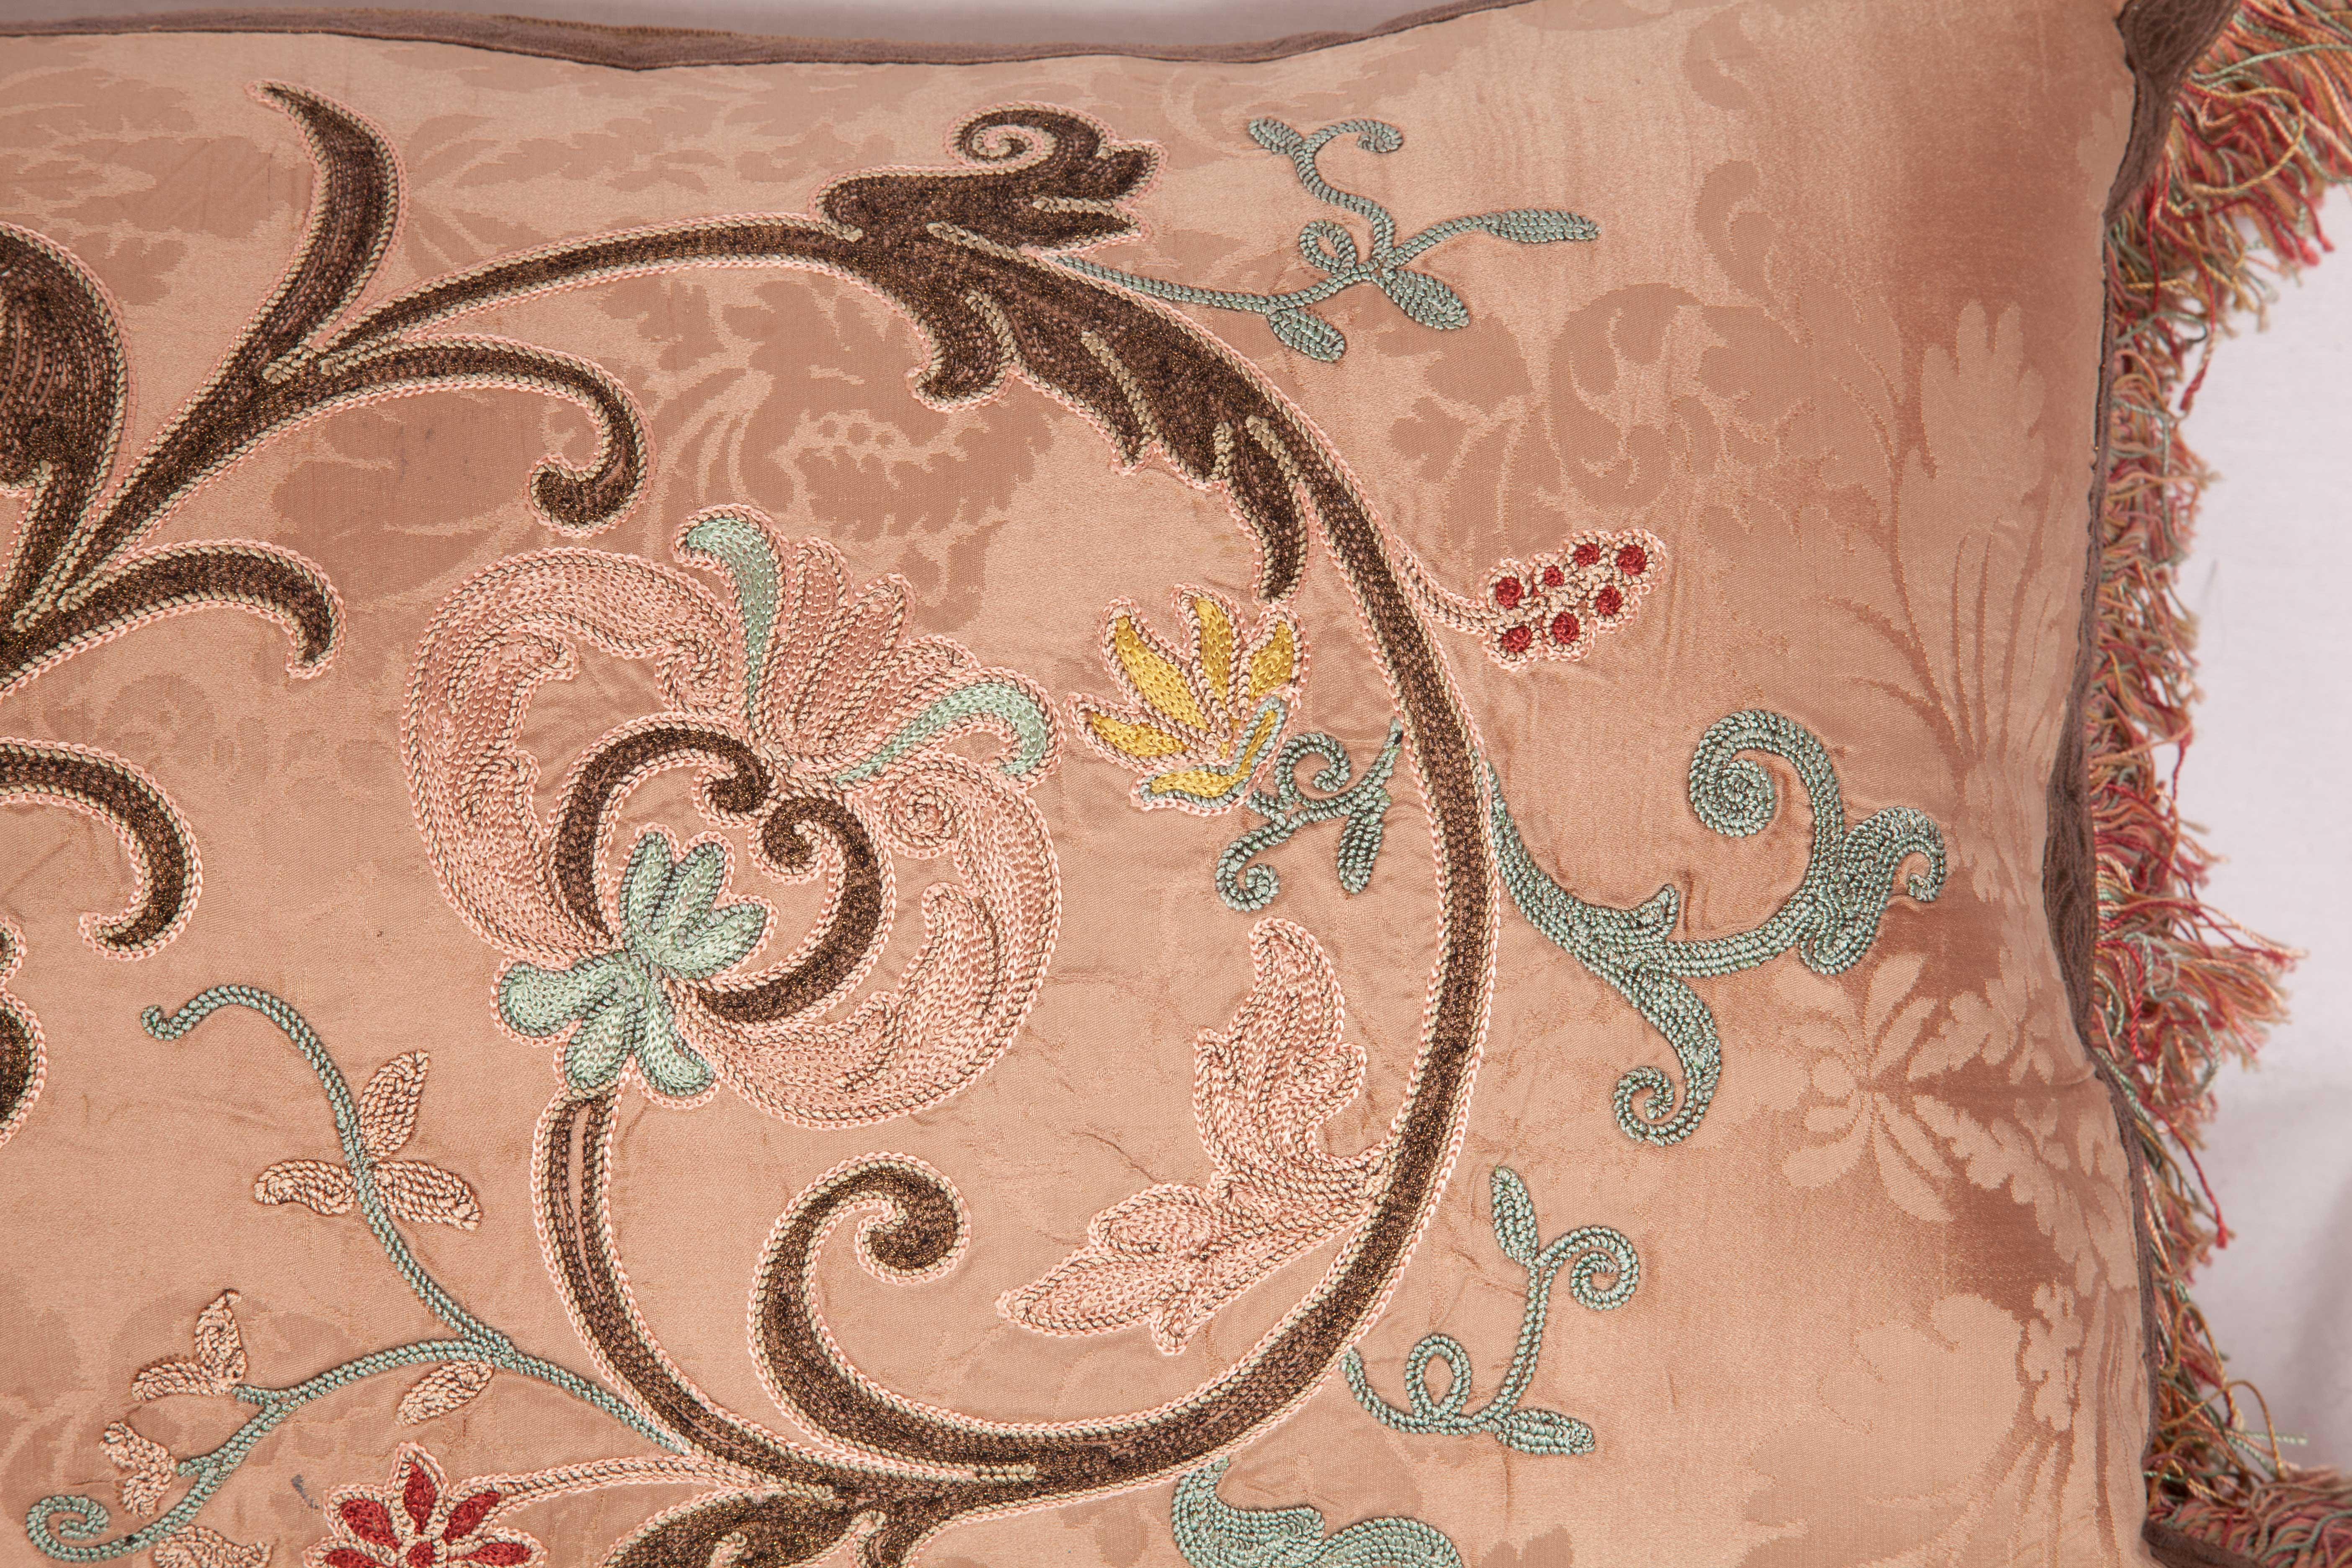 Embroidered Long Pillow Case Fashioned from a European Embroidery, Late 19th Century